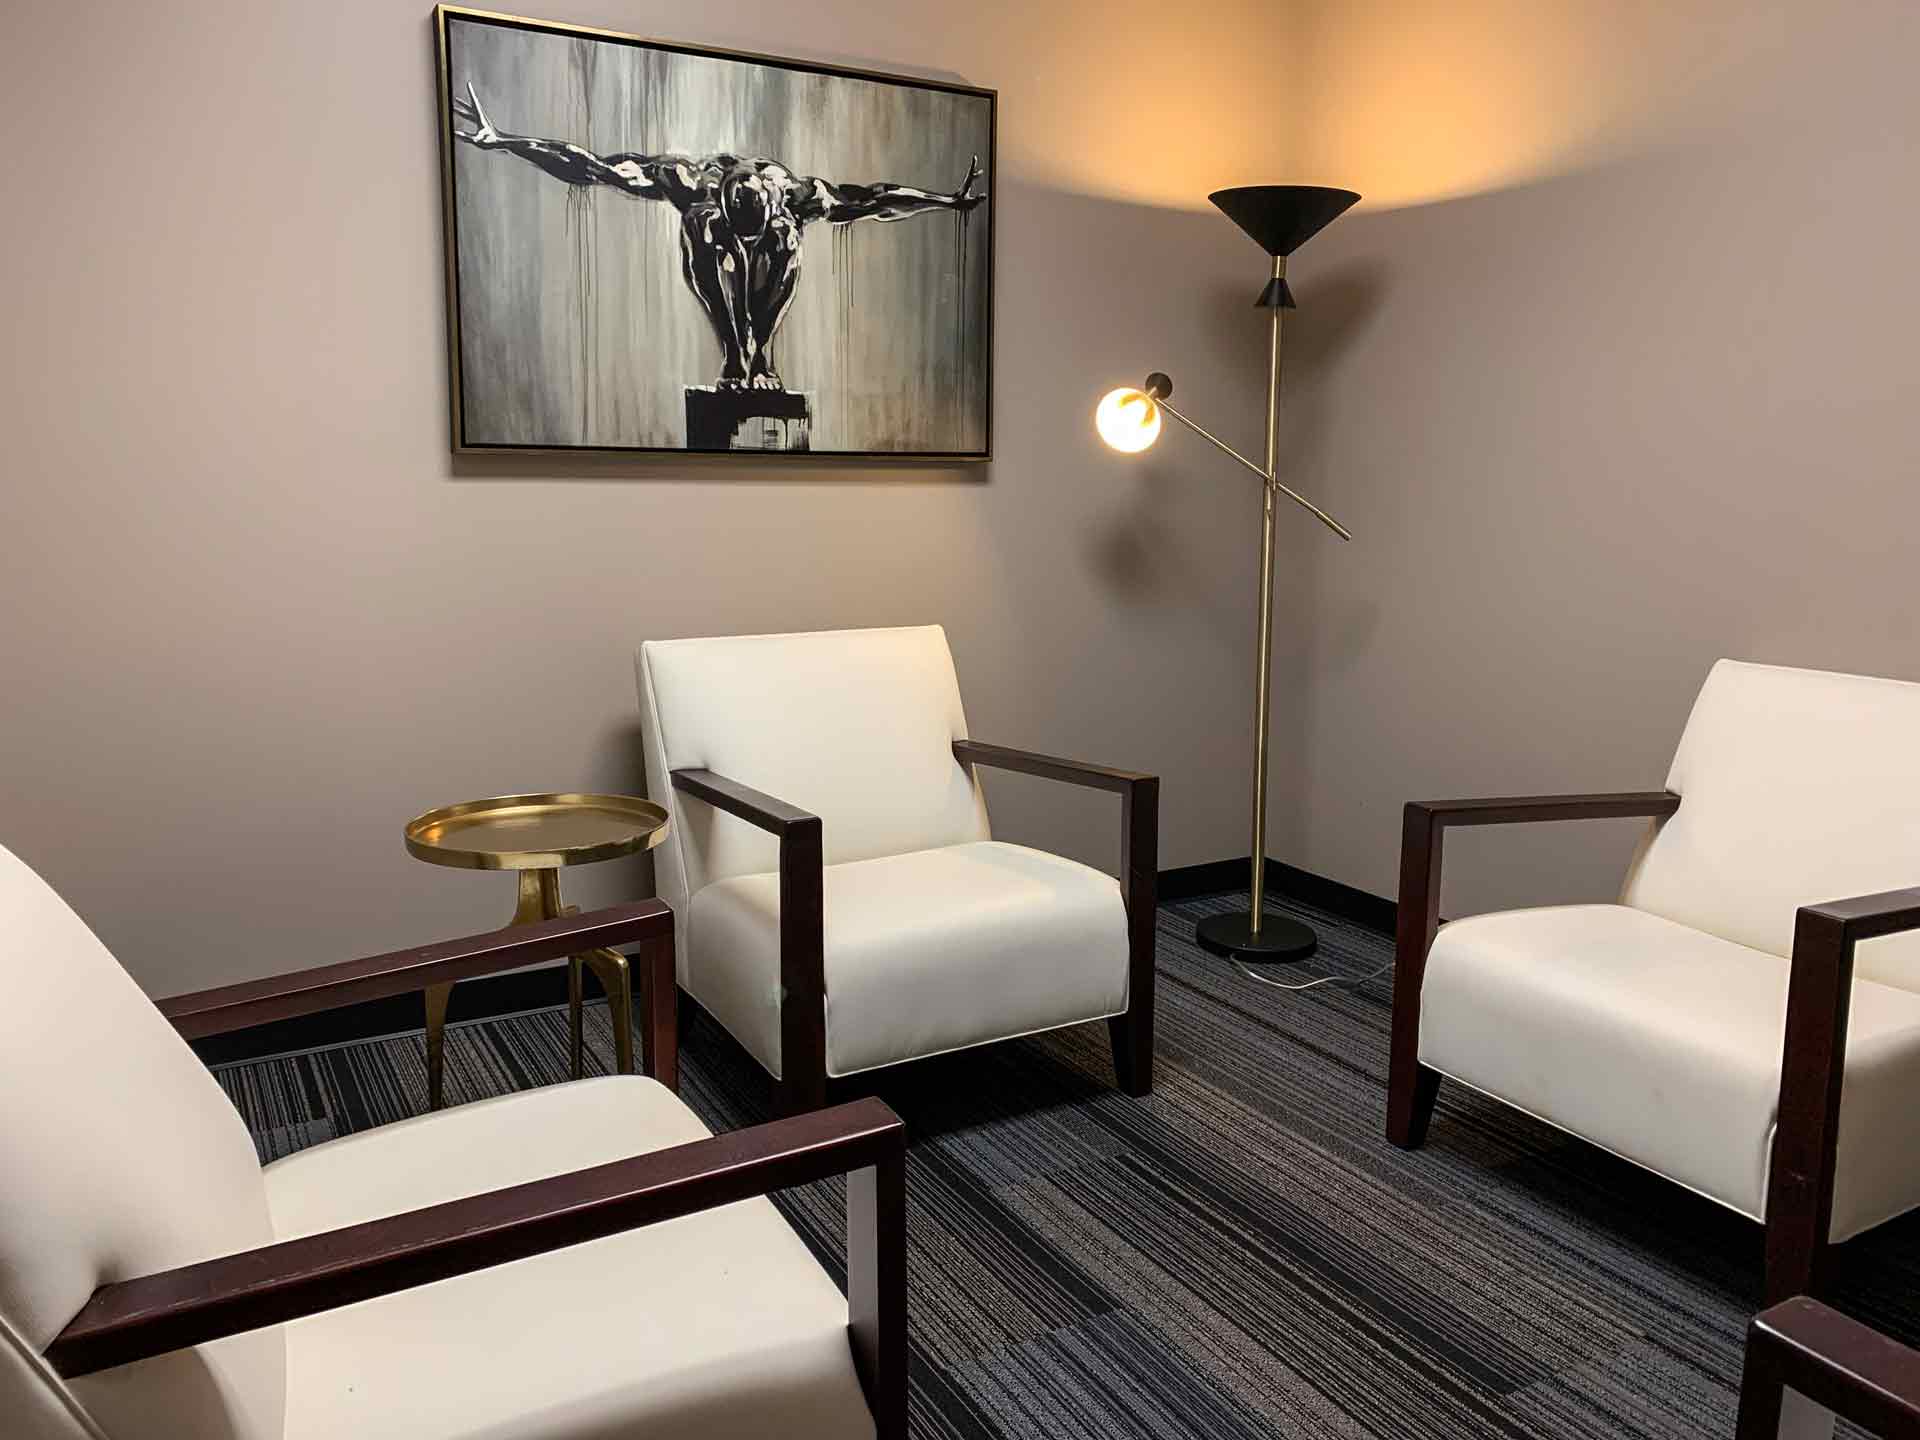 Houston meeting rooms. Perfect for interviews or private phone calls, room has 4 chairs.